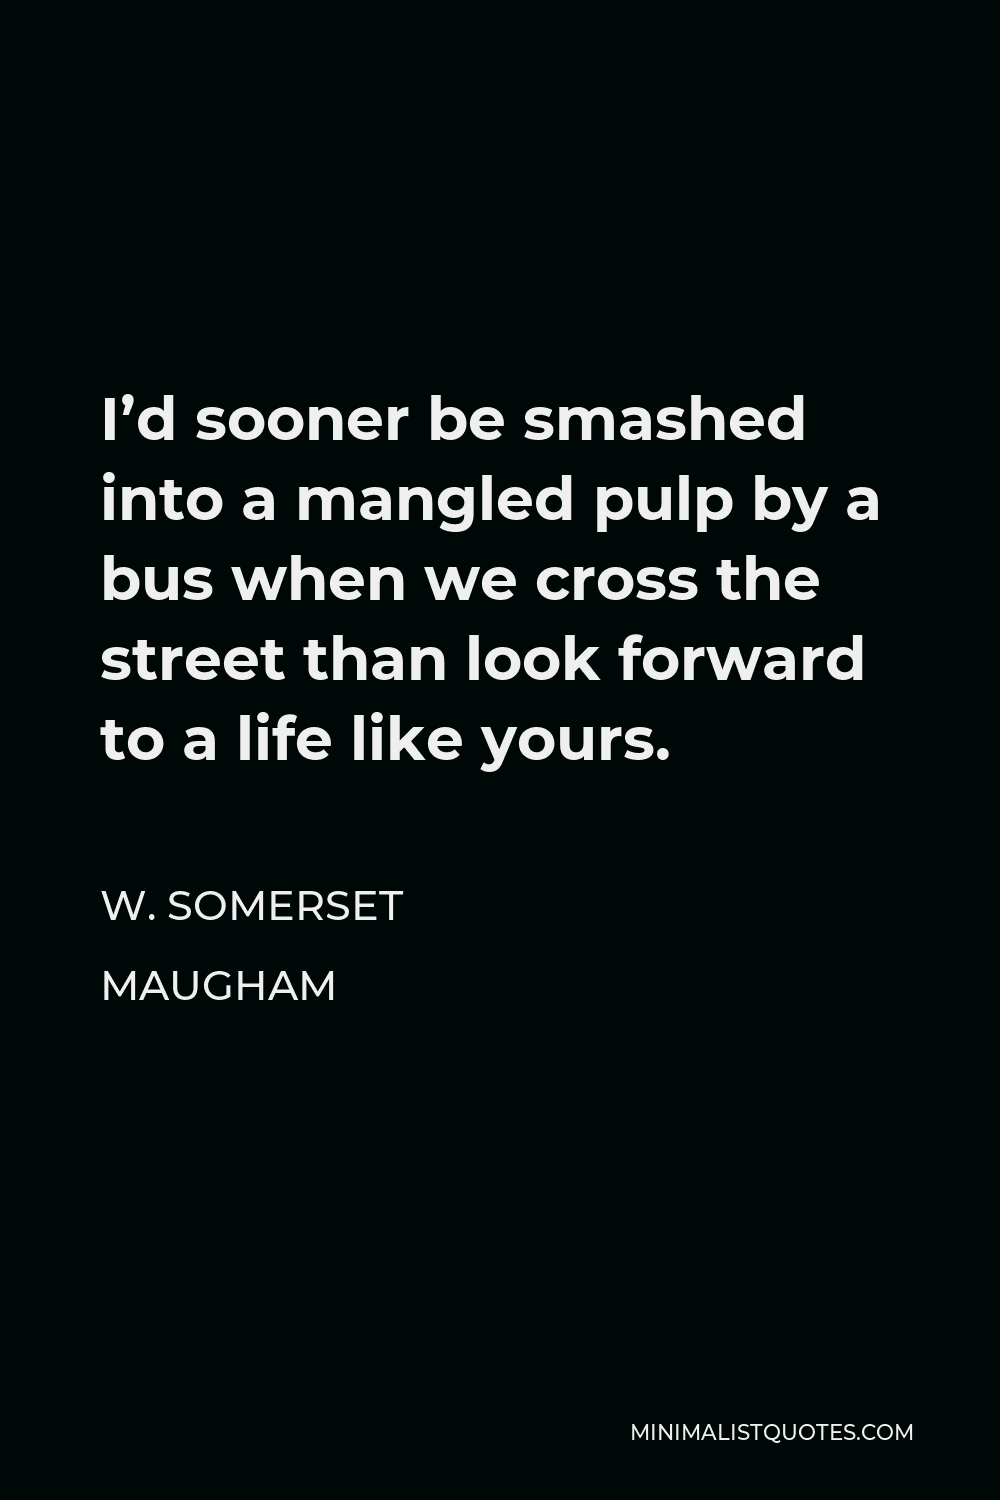 W. Somerset Maugham Quote - I’d sooner be smashed into a mangled pulp by a bus when we cross the street than look forward to a life like yours.